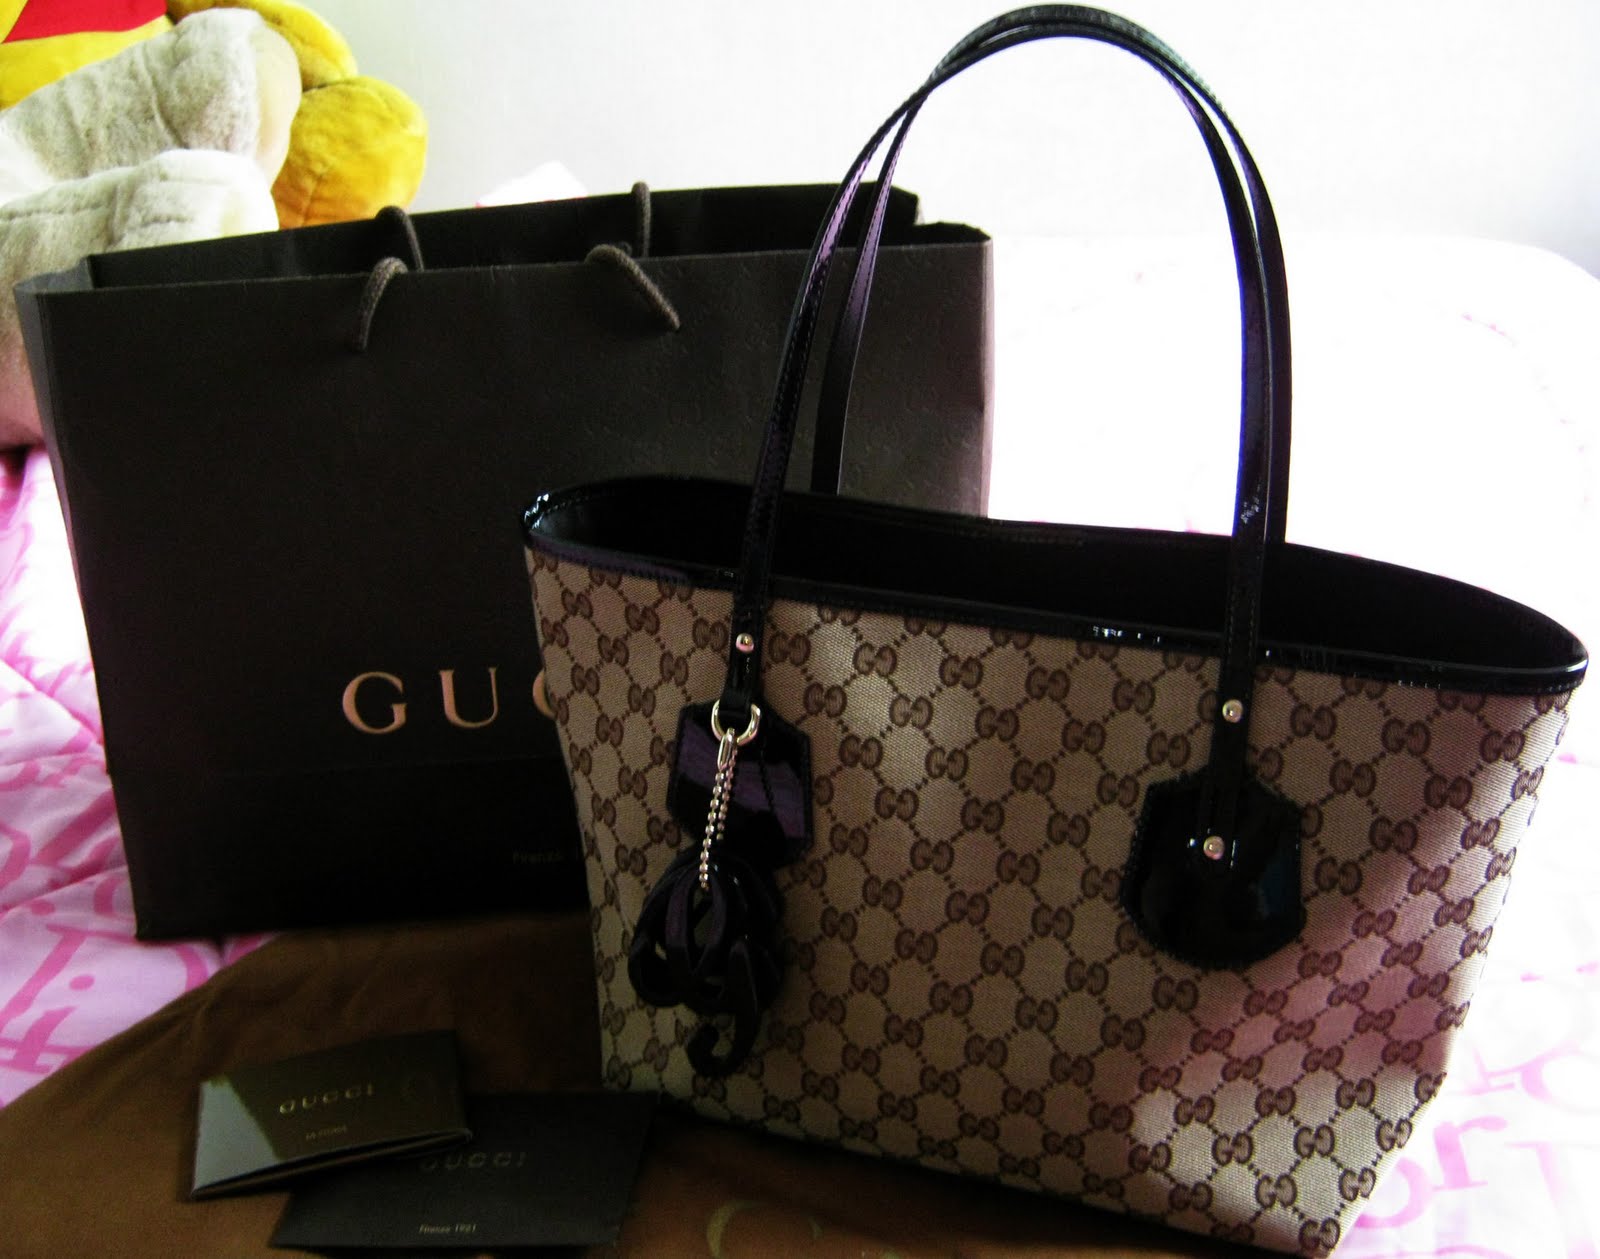 Fabulous lovely finds: AUTHENTIC GUCCI JOLIE MEDIUM TOTE